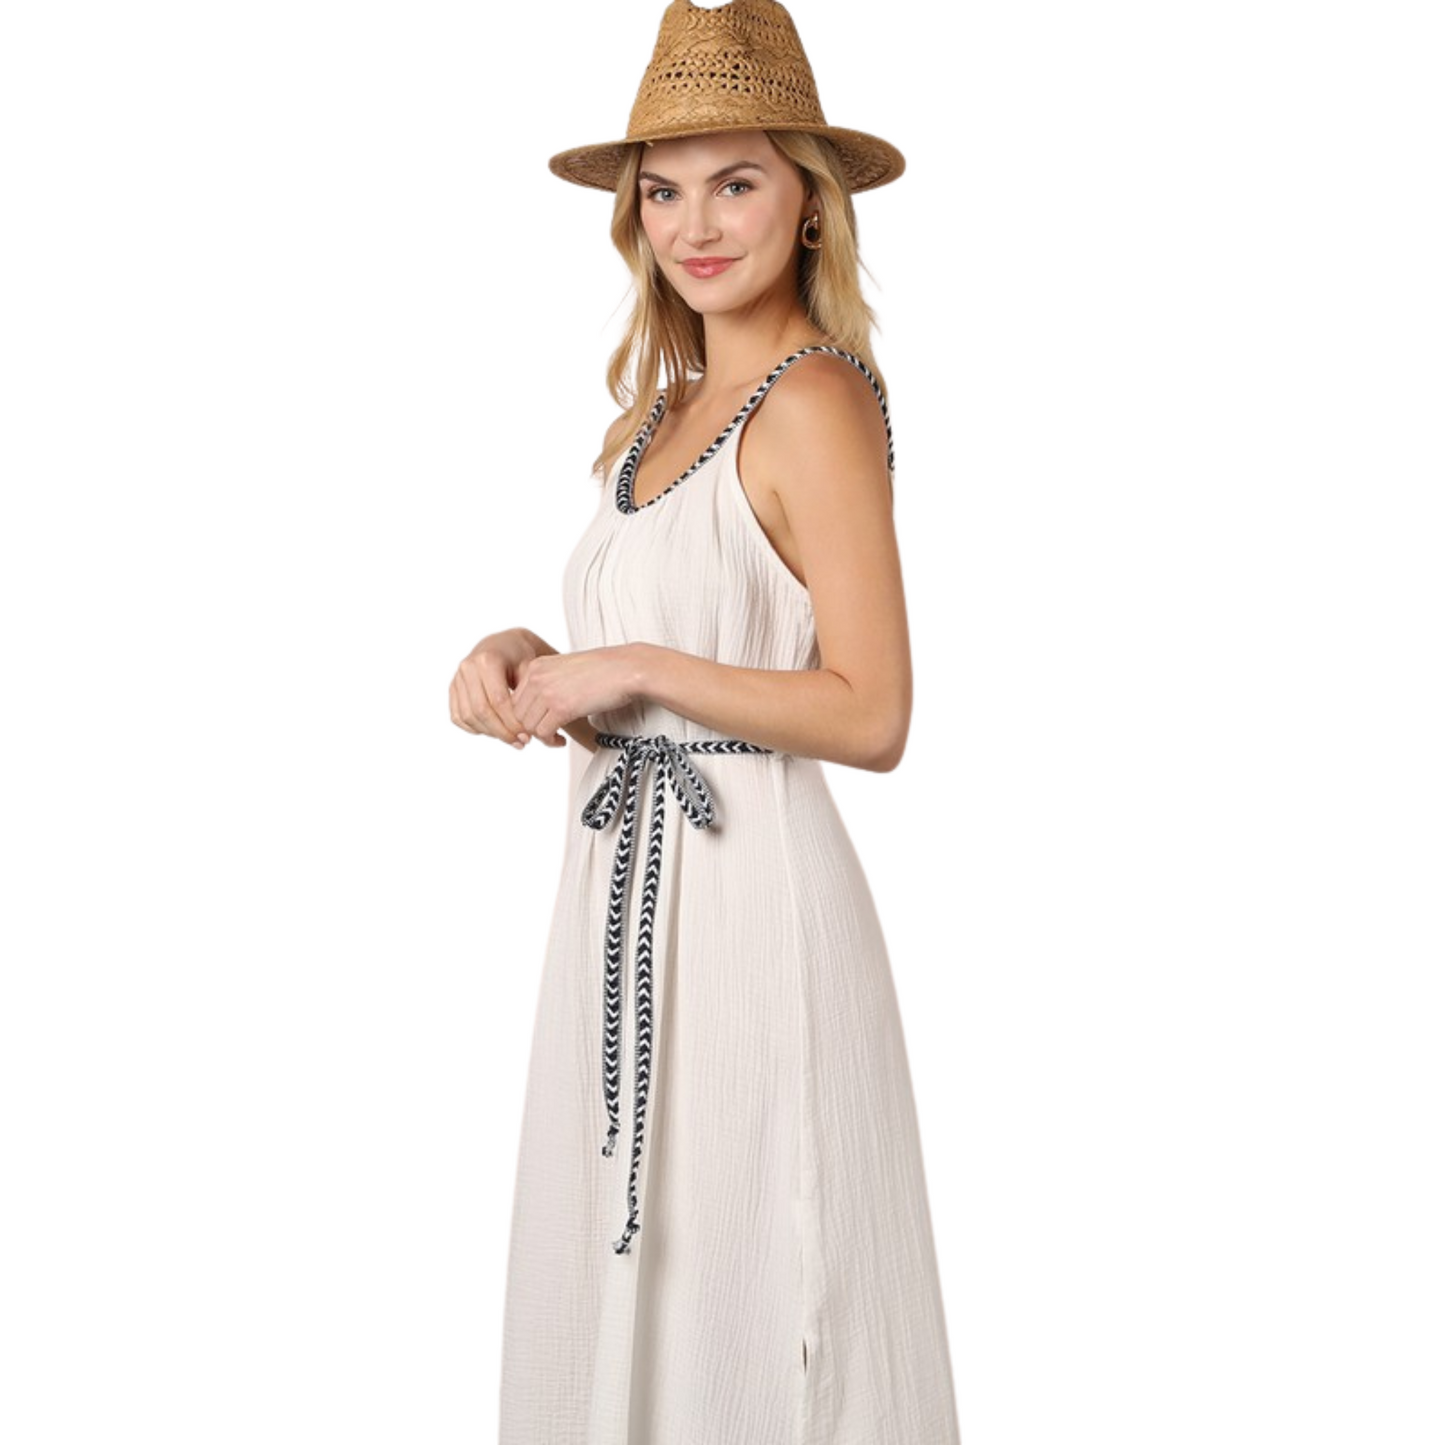 Ninexis Belted Maxi Dress (3 Colors S-XL)